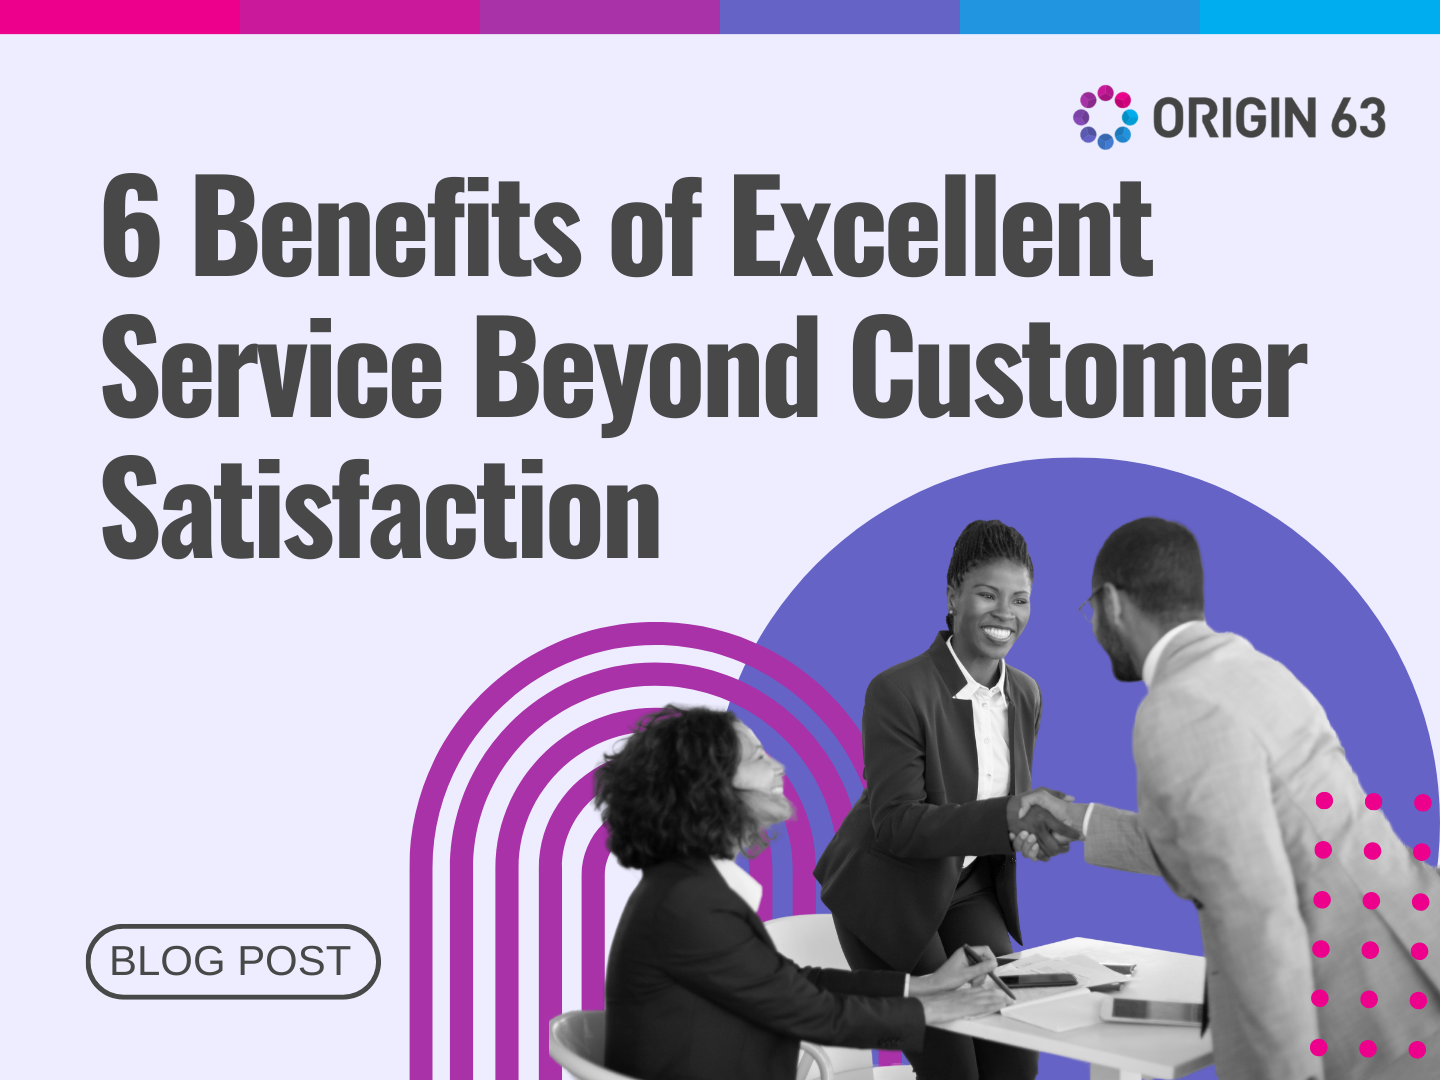 Discover six powerful benefits of exceptional customer service beyond satisfaction and driving business growth.